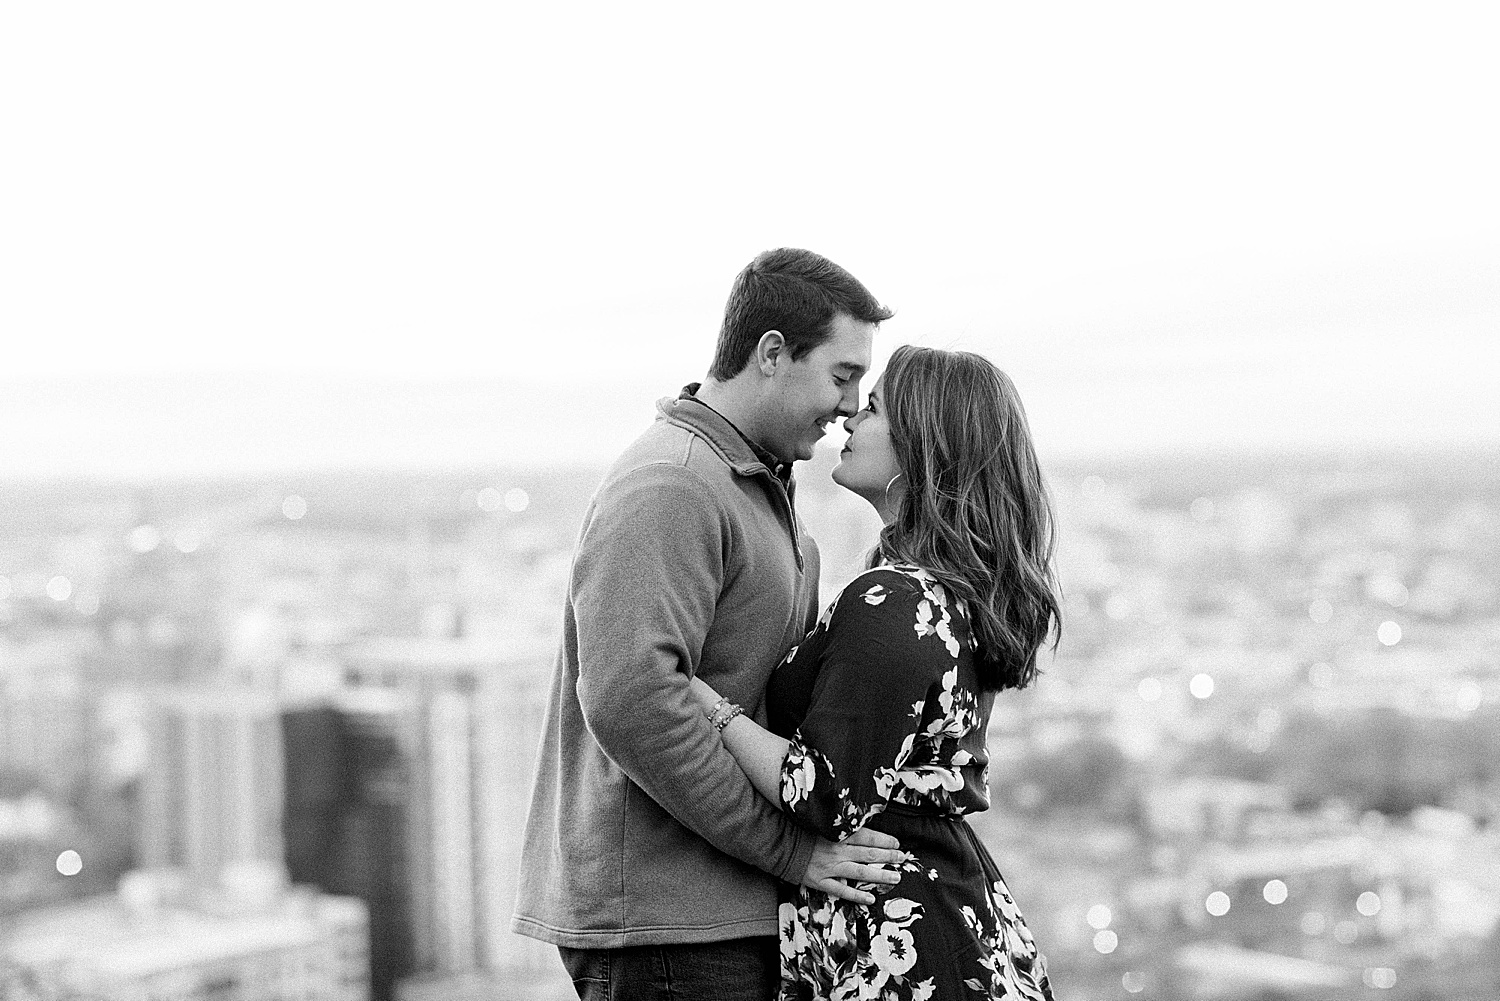 Alabama couple share intimate moment during Downtown Birmingham AL Engagement Portraits